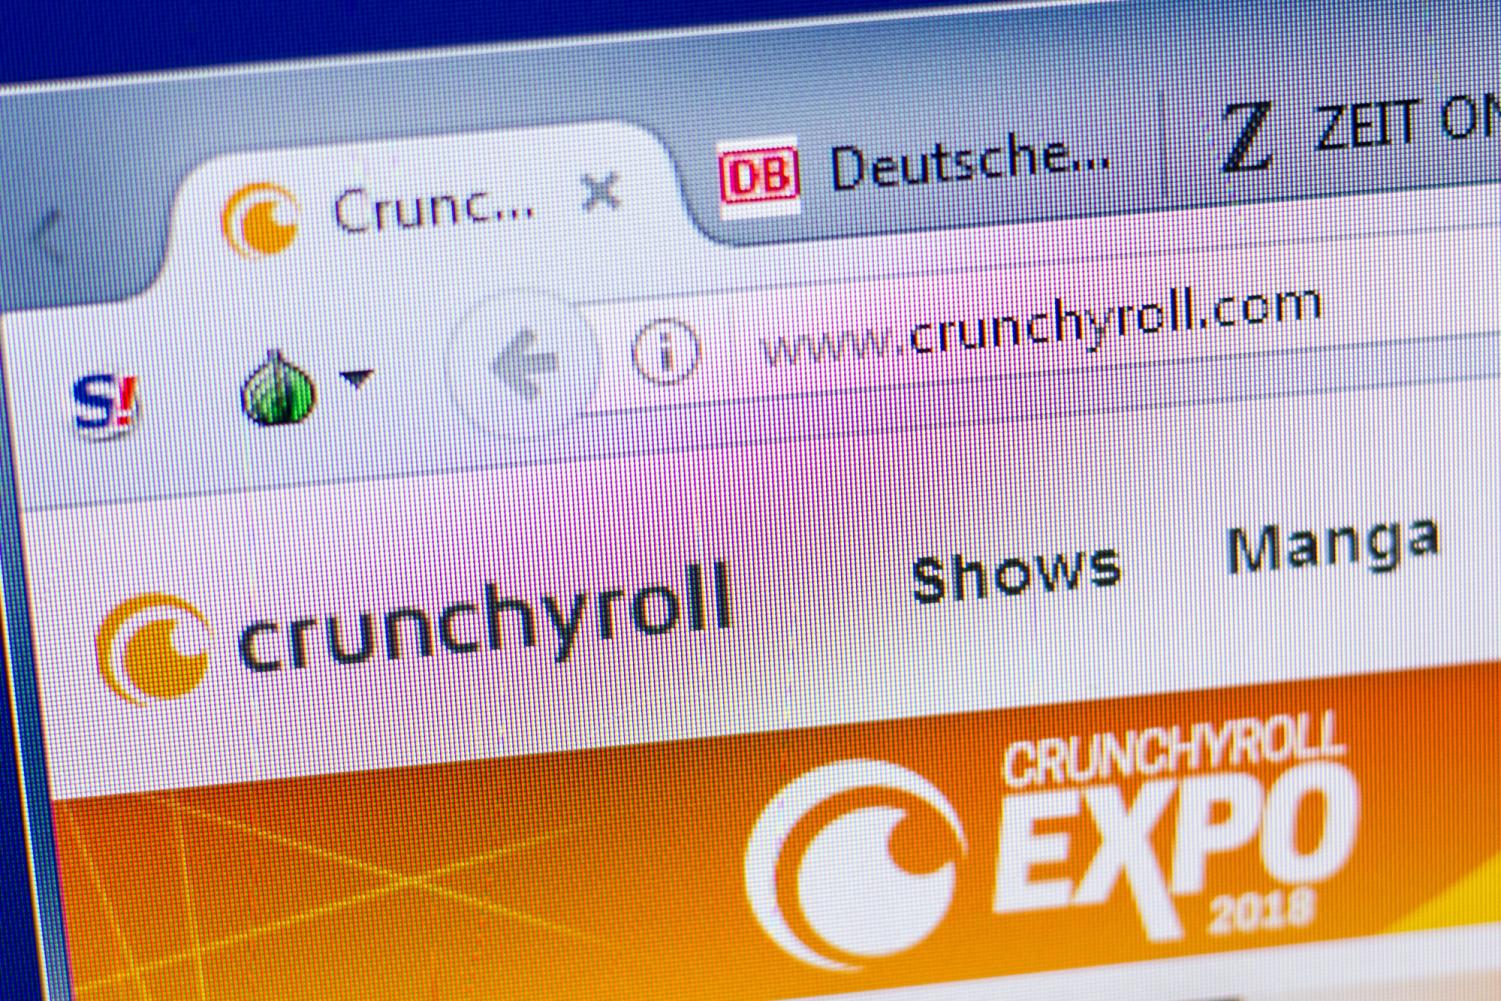 Crunchyroll free trial: is there one and how to get it?